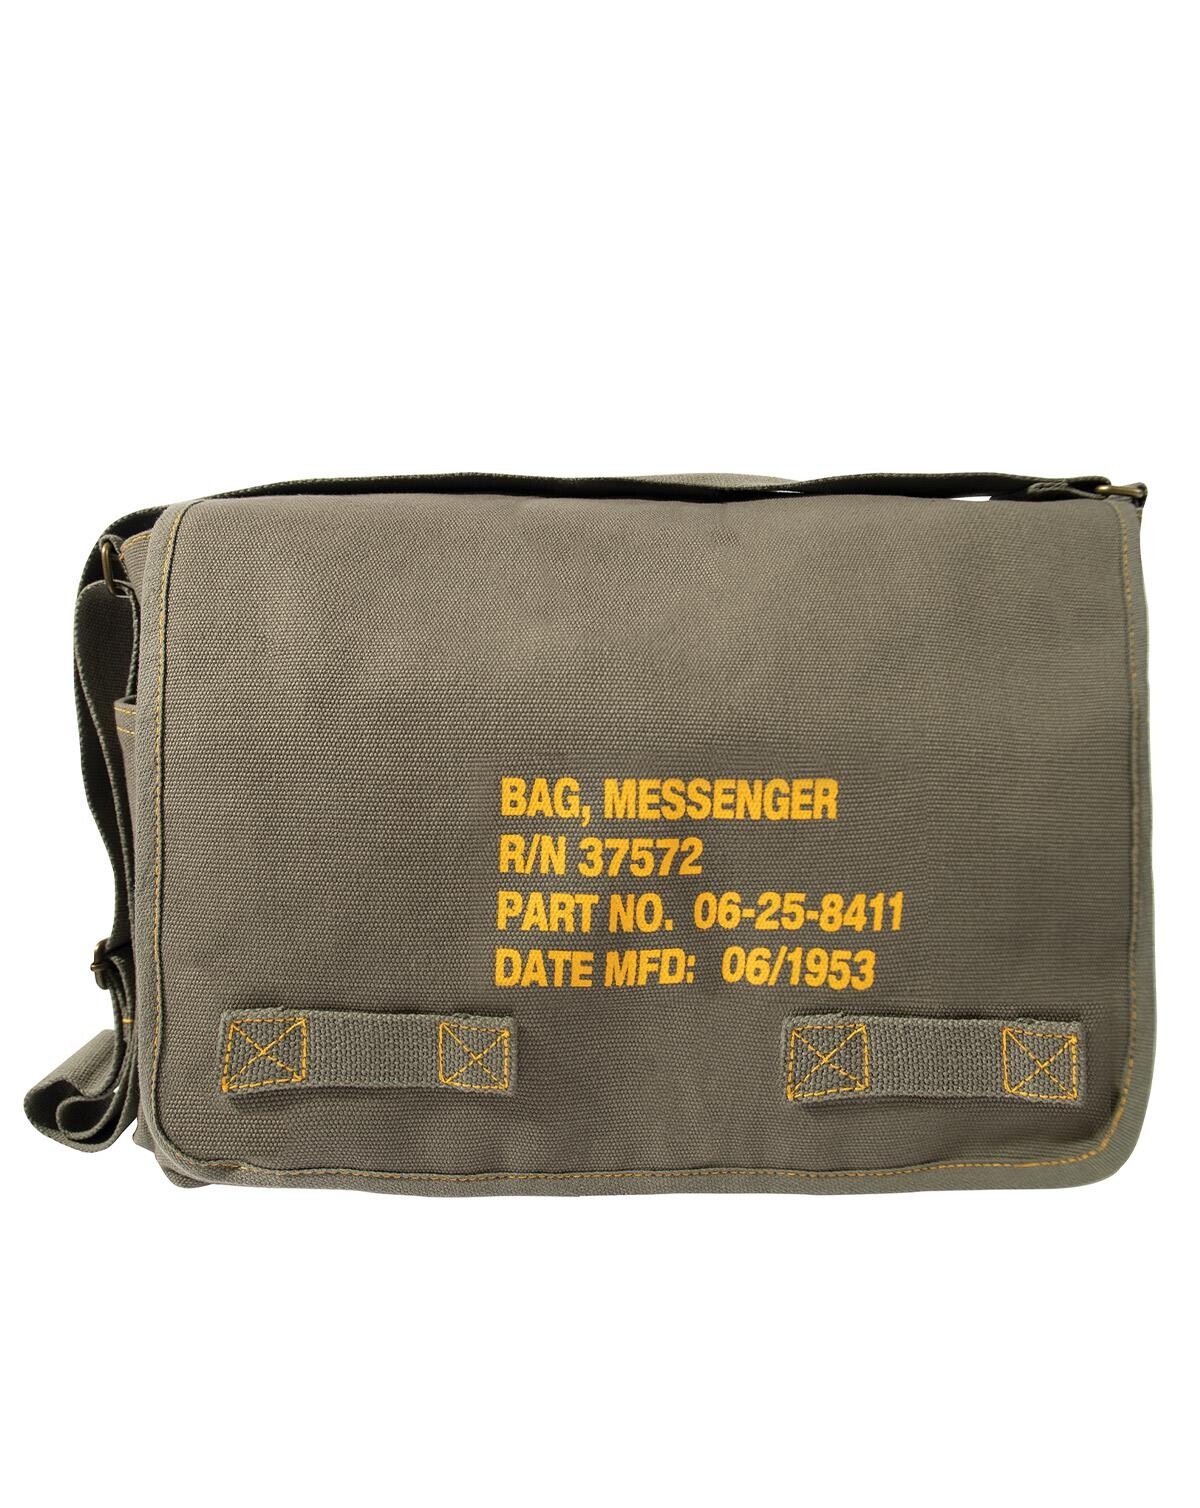 4: Rothco Heavyweight Canvas Classic Messenger Bag With Military Stencil (Oliven, One Size)